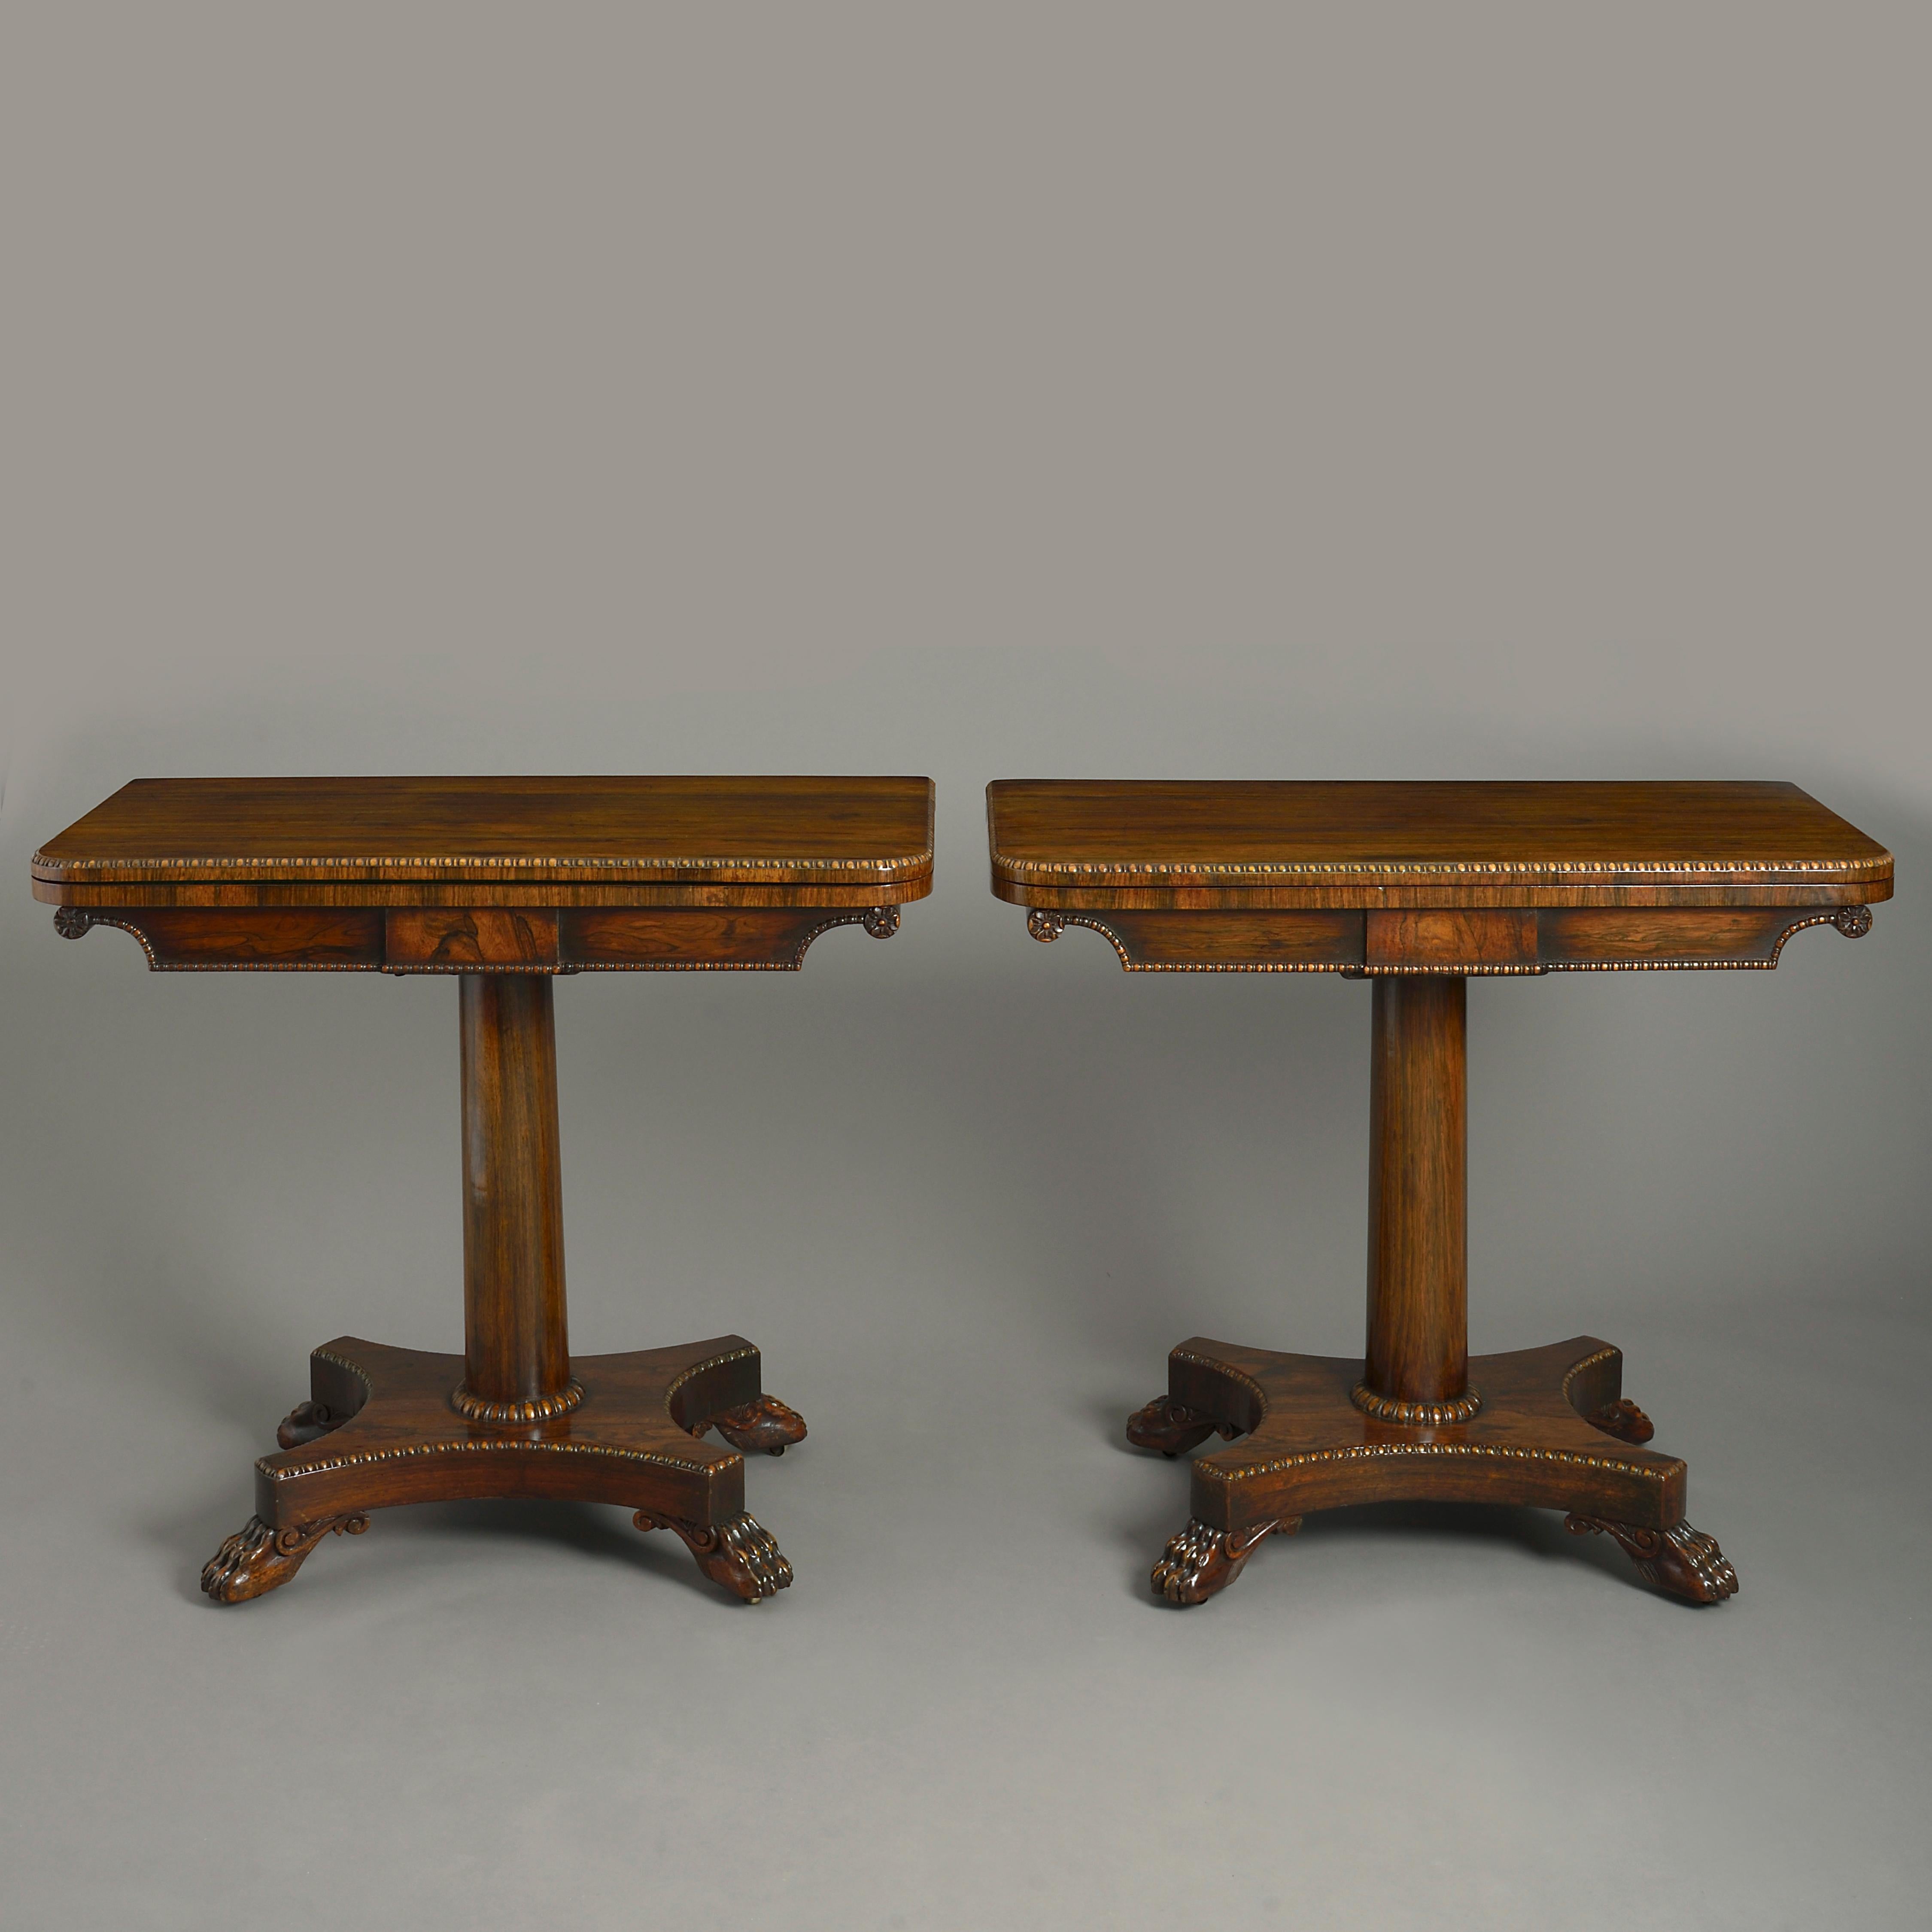 A pair of early 19th century Regency period rosewood card tables, each having a swivel top with carved egg and dart motif beading, opening to reveal a recess and green baize underside, raised upon a turned column stem above a concave plinth with